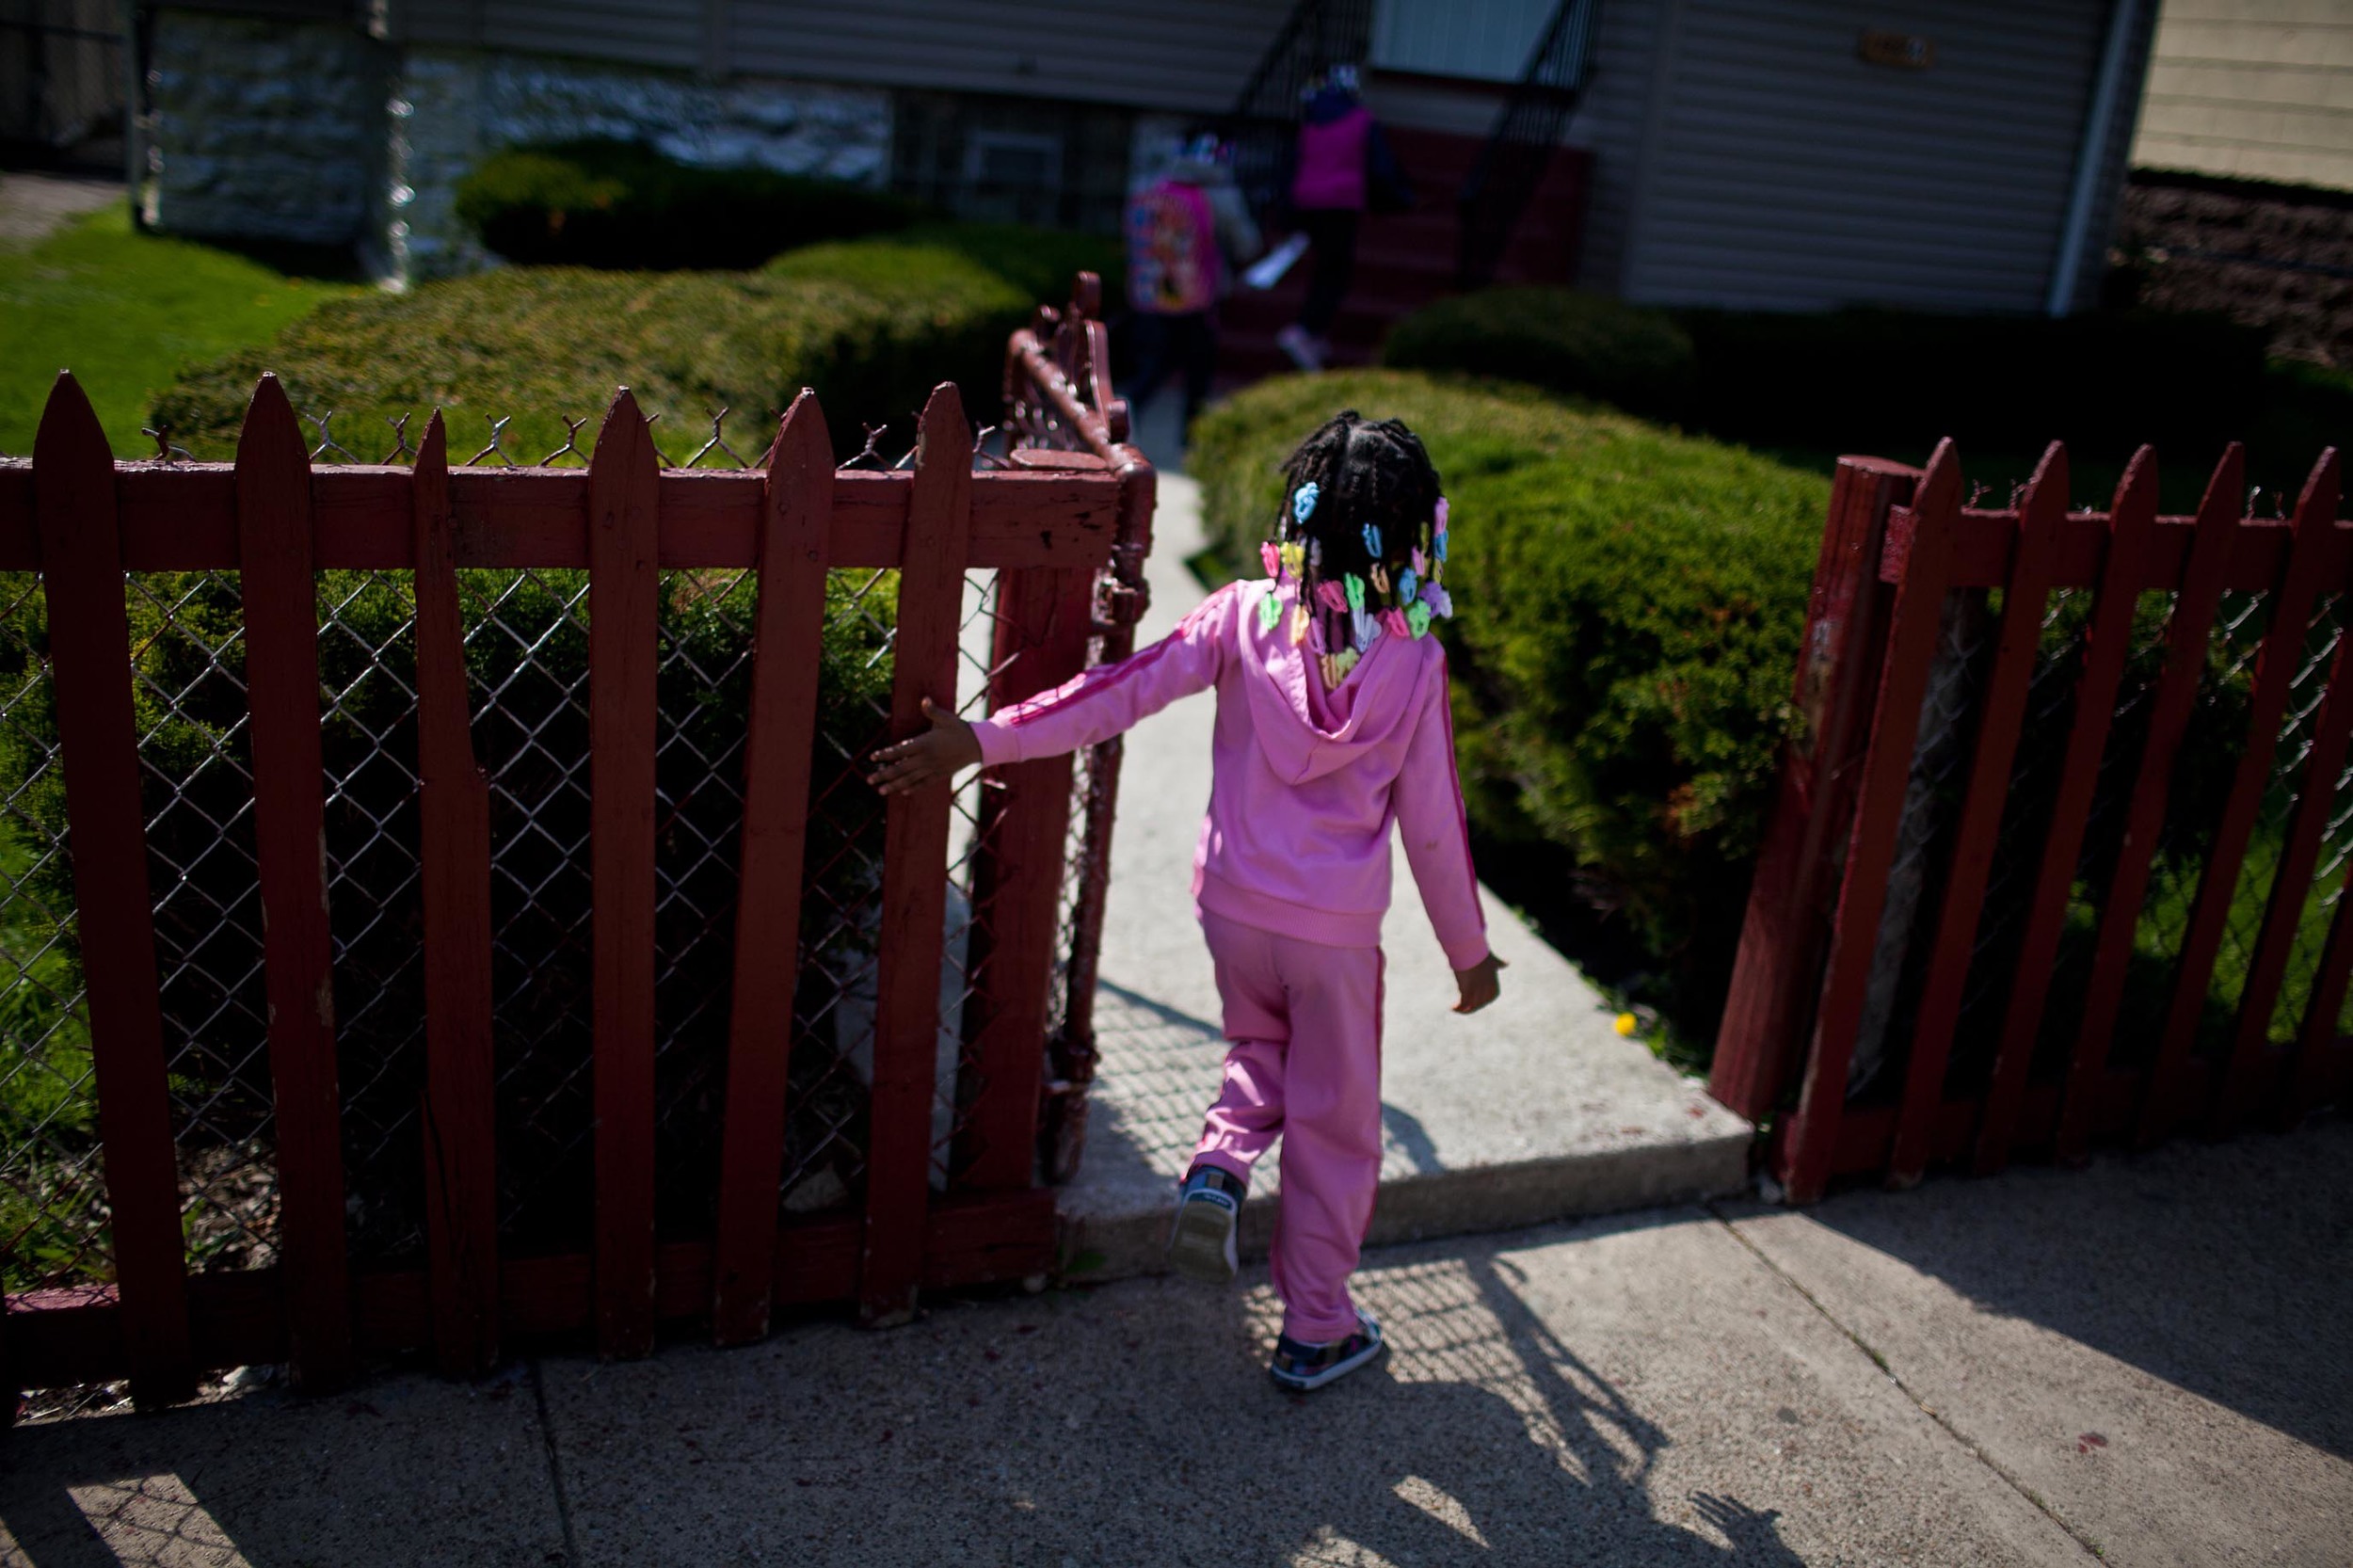    Destiny Johnson’s three daughters enter the family’s home in Auburn Gresham, one of the 10 communities in Chicago with the highest number of youth homicides. Between 2008 and 2012, 41 people younger than 25 were killed in the neighborhood.   